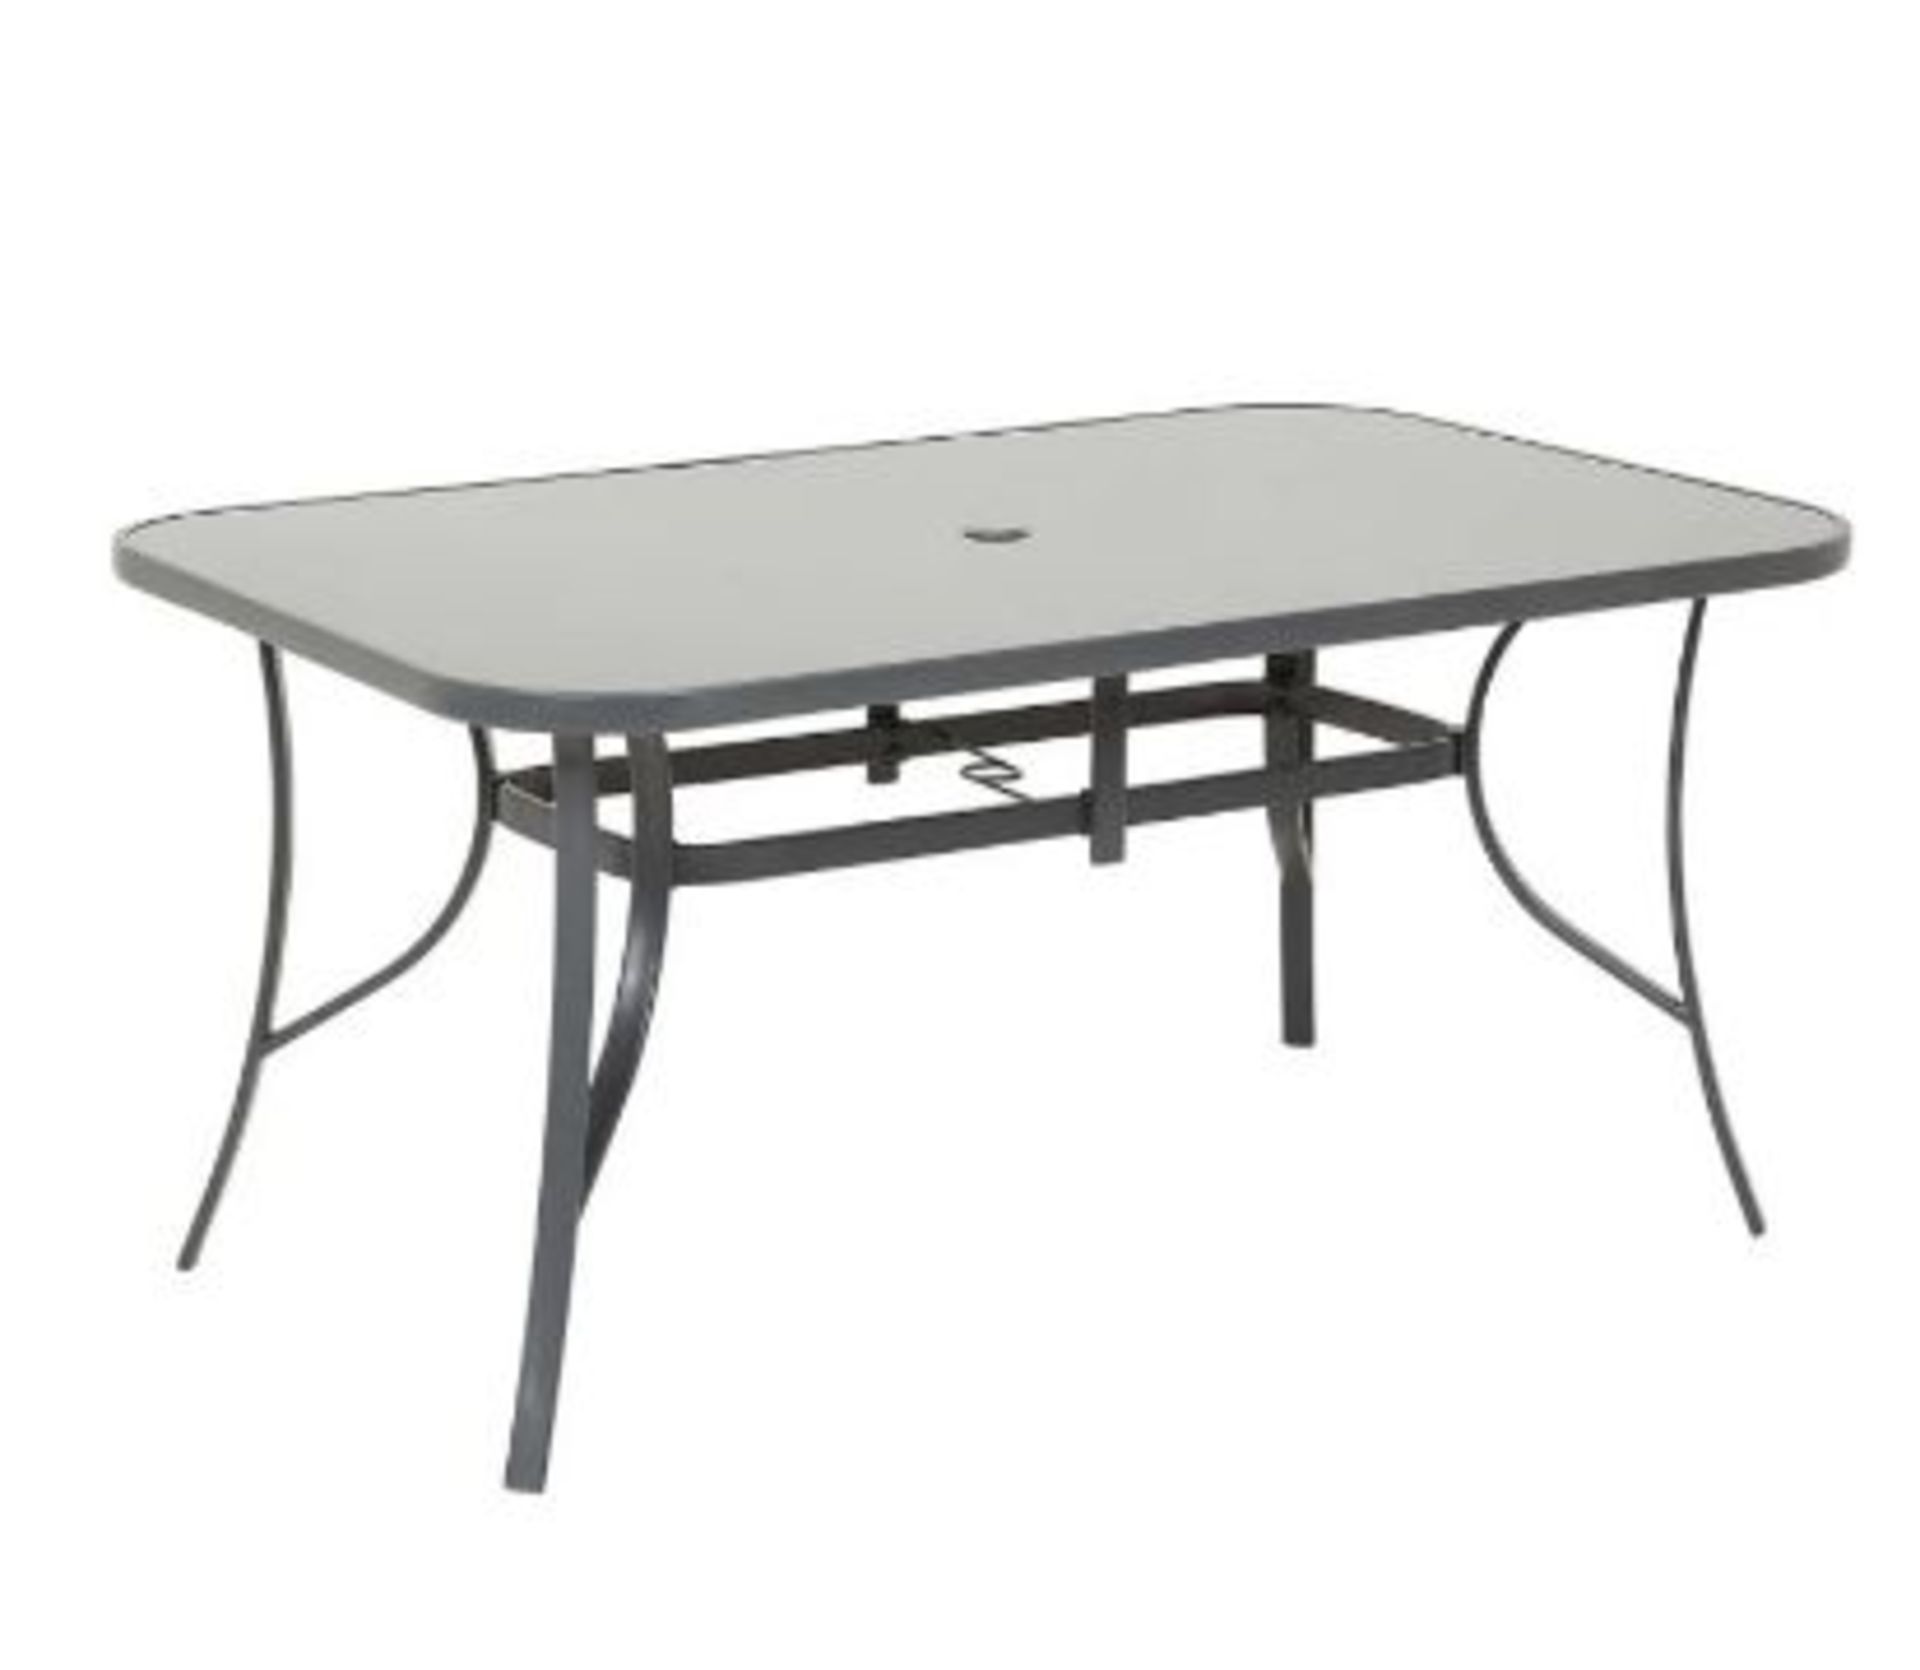 (44/Mez) 2x Items. 1x Rowly Large Rectangle Garden Table With Toughened Glass Top (W150x D90x H72... - Image 2 of 3